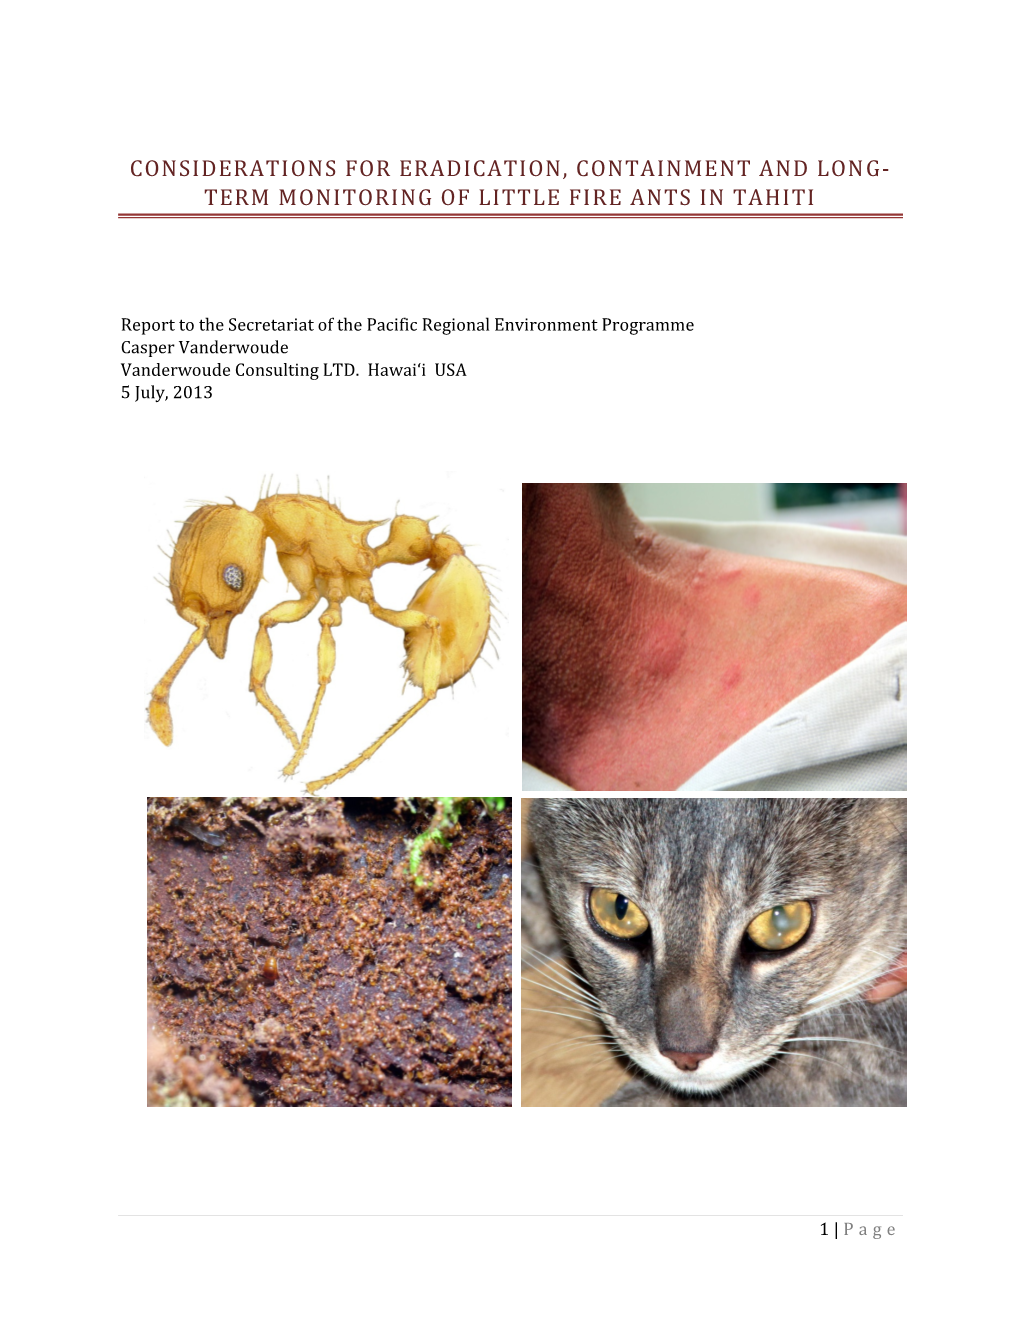 Term Monitoring of Little Fire Ants in Tahiti